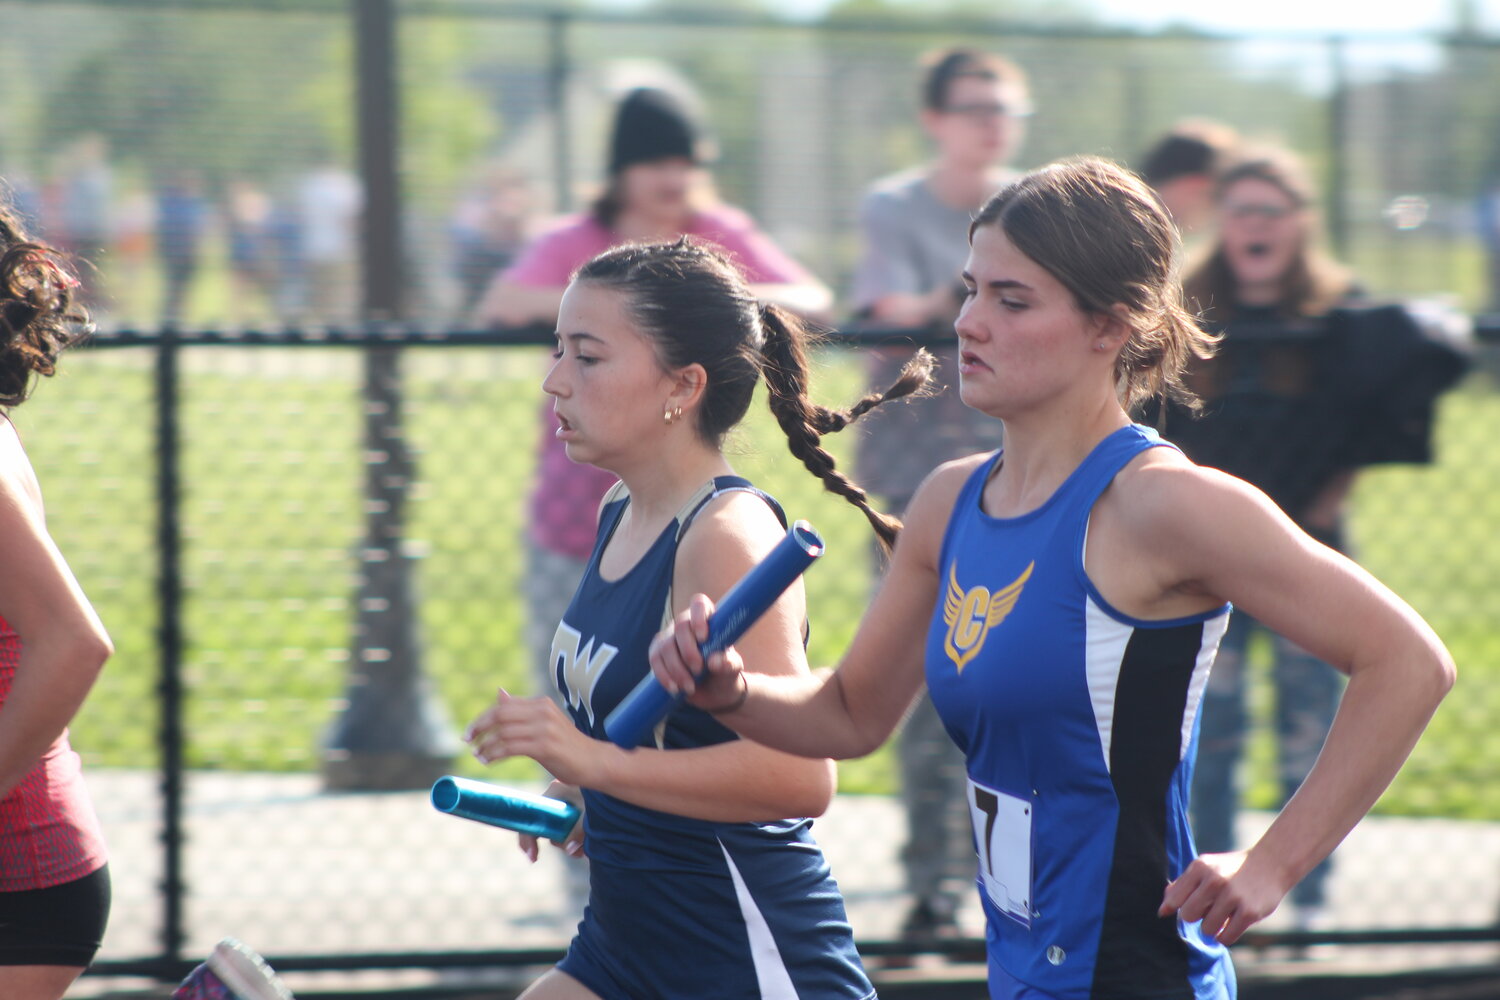 Crawfordsville's Sophia Melevage helped the Athenian 4x800 girls team break the school record with their time of 10:29.22.